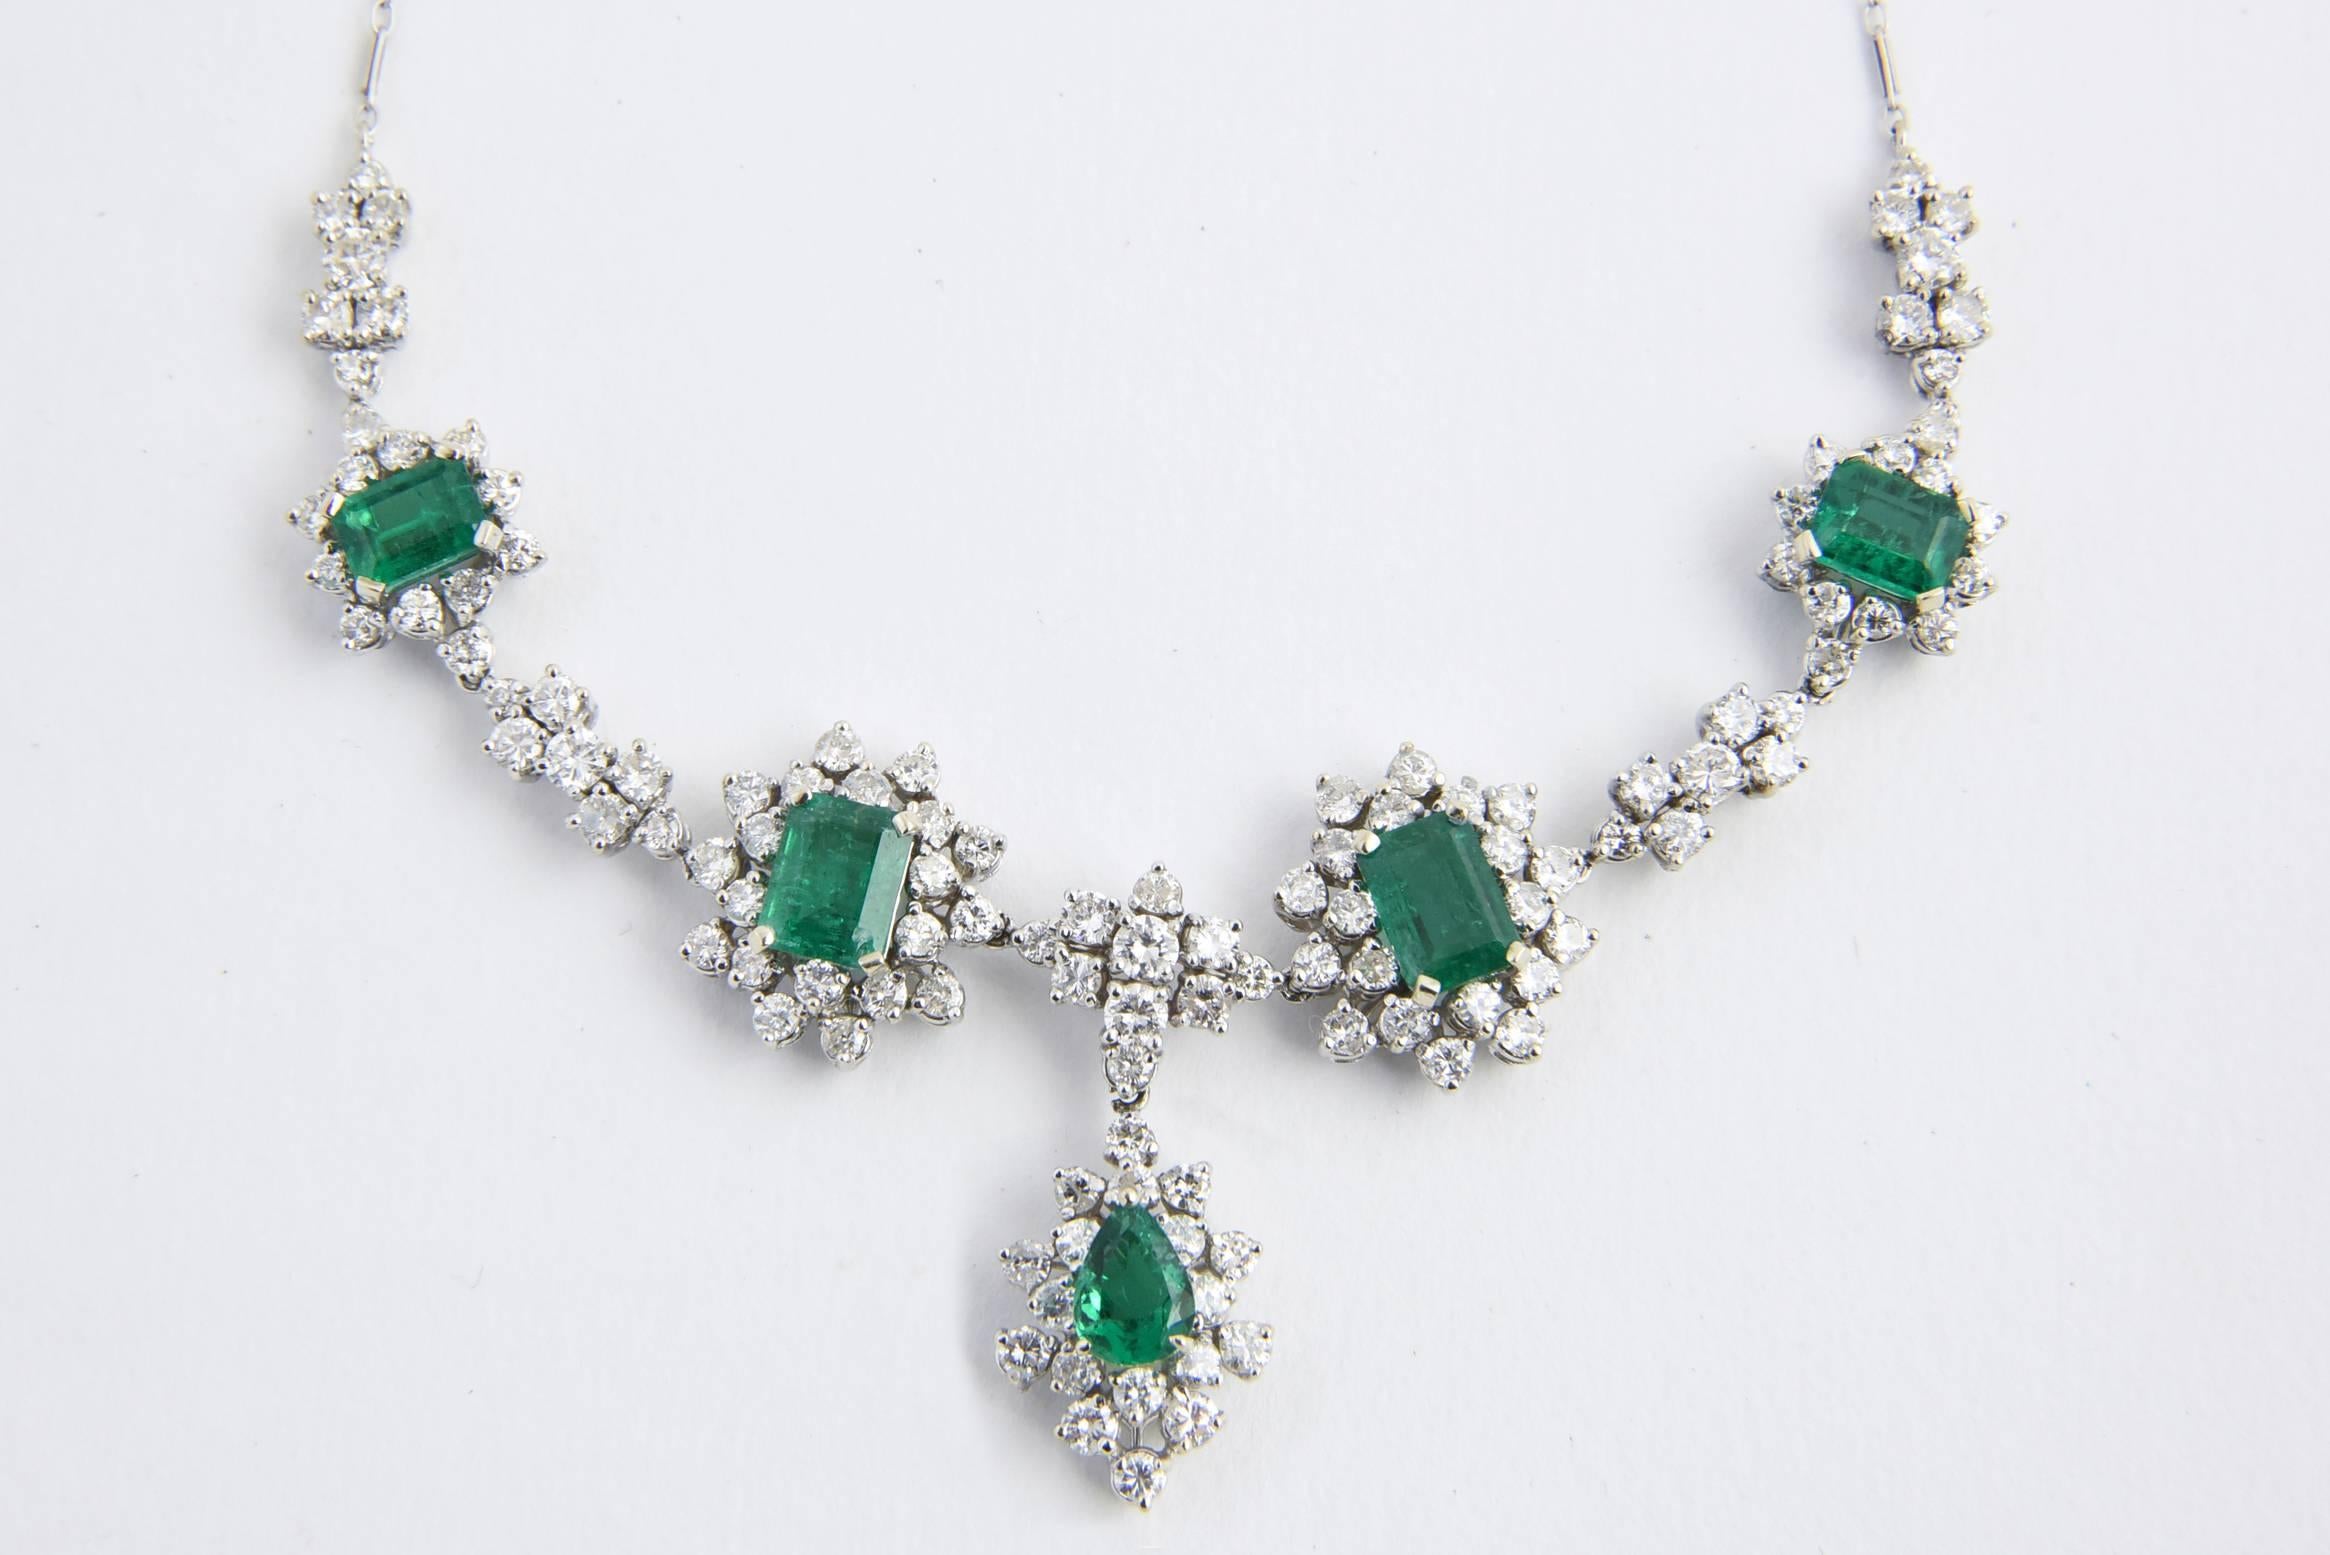 Glamorous 1950s emerald and diamond necklace featuring 5 brilliant Zambian Emeralds surrounded by approximately 5 carats of beautiful diamonds.  

The necklace was examined by GIA who identified the emerald as Zambian with type F1 enhancements. 